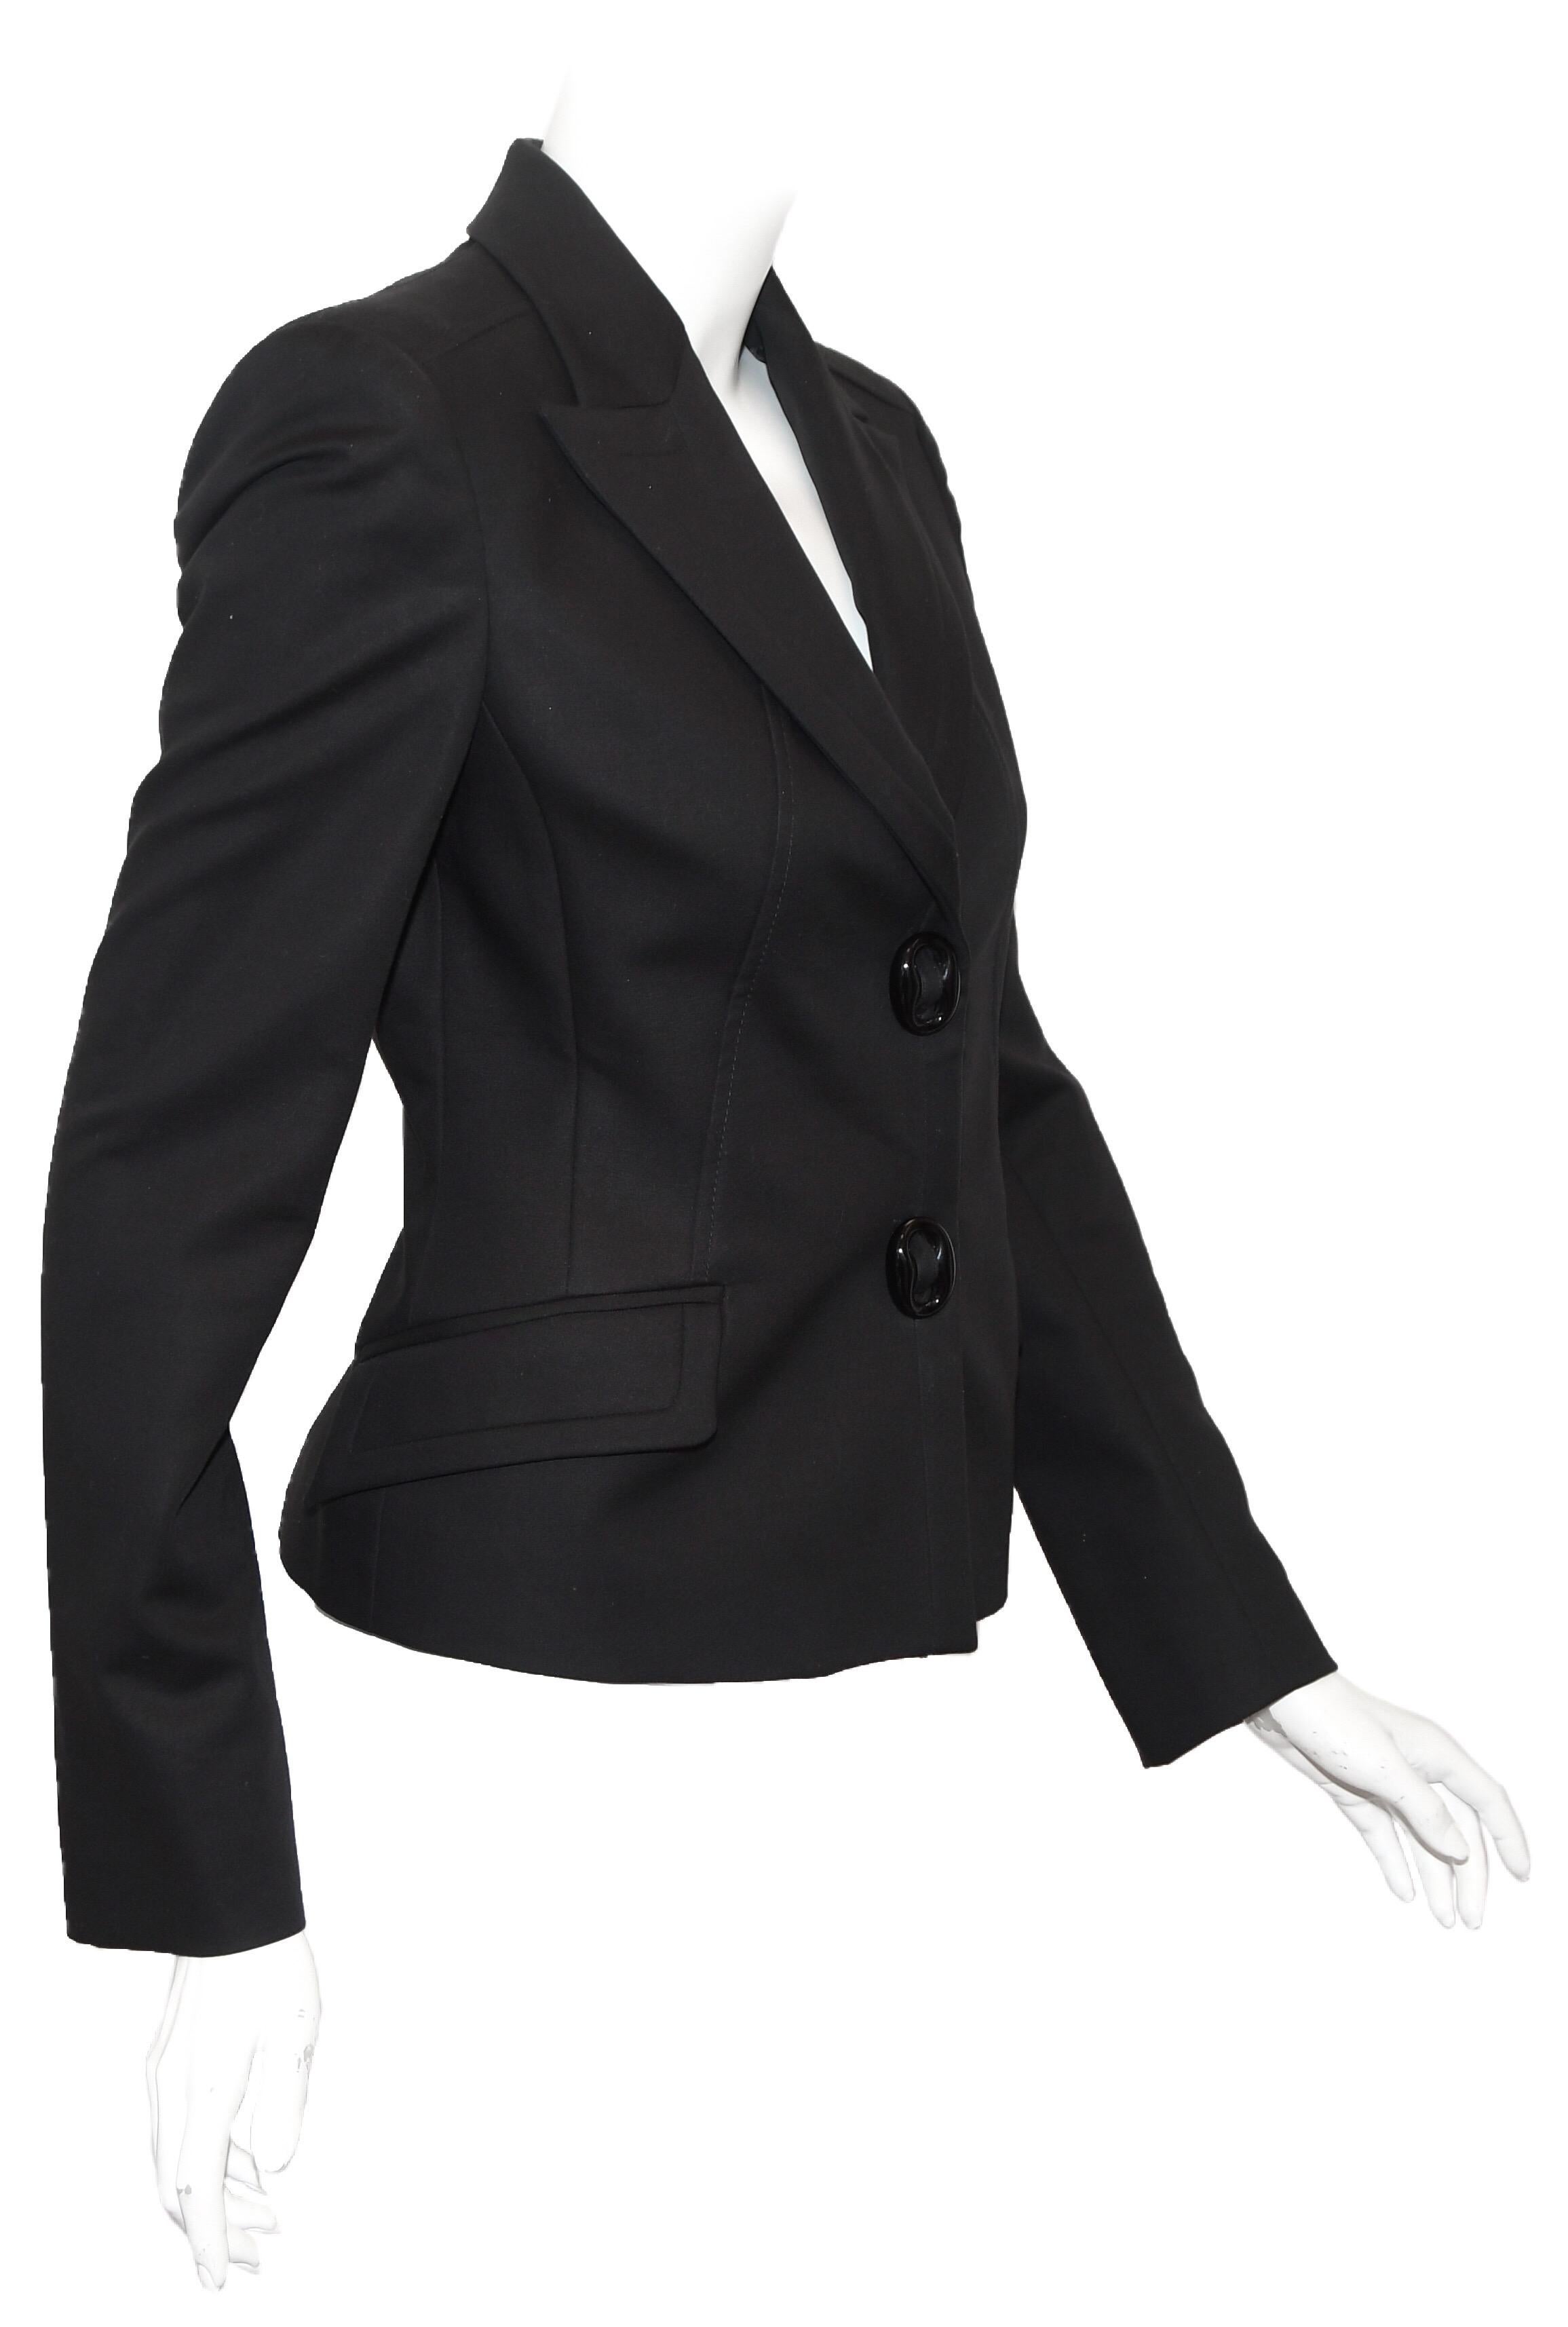 Versace black jacket features fitted silhouette, notched collar, and two flap pockets,  and 2 oval Versace buttons.  This cotton blend blazer is lined in black viscose.  Exquisite Italian workmanship abounds!  Excellent Condition.  Made in Italy 